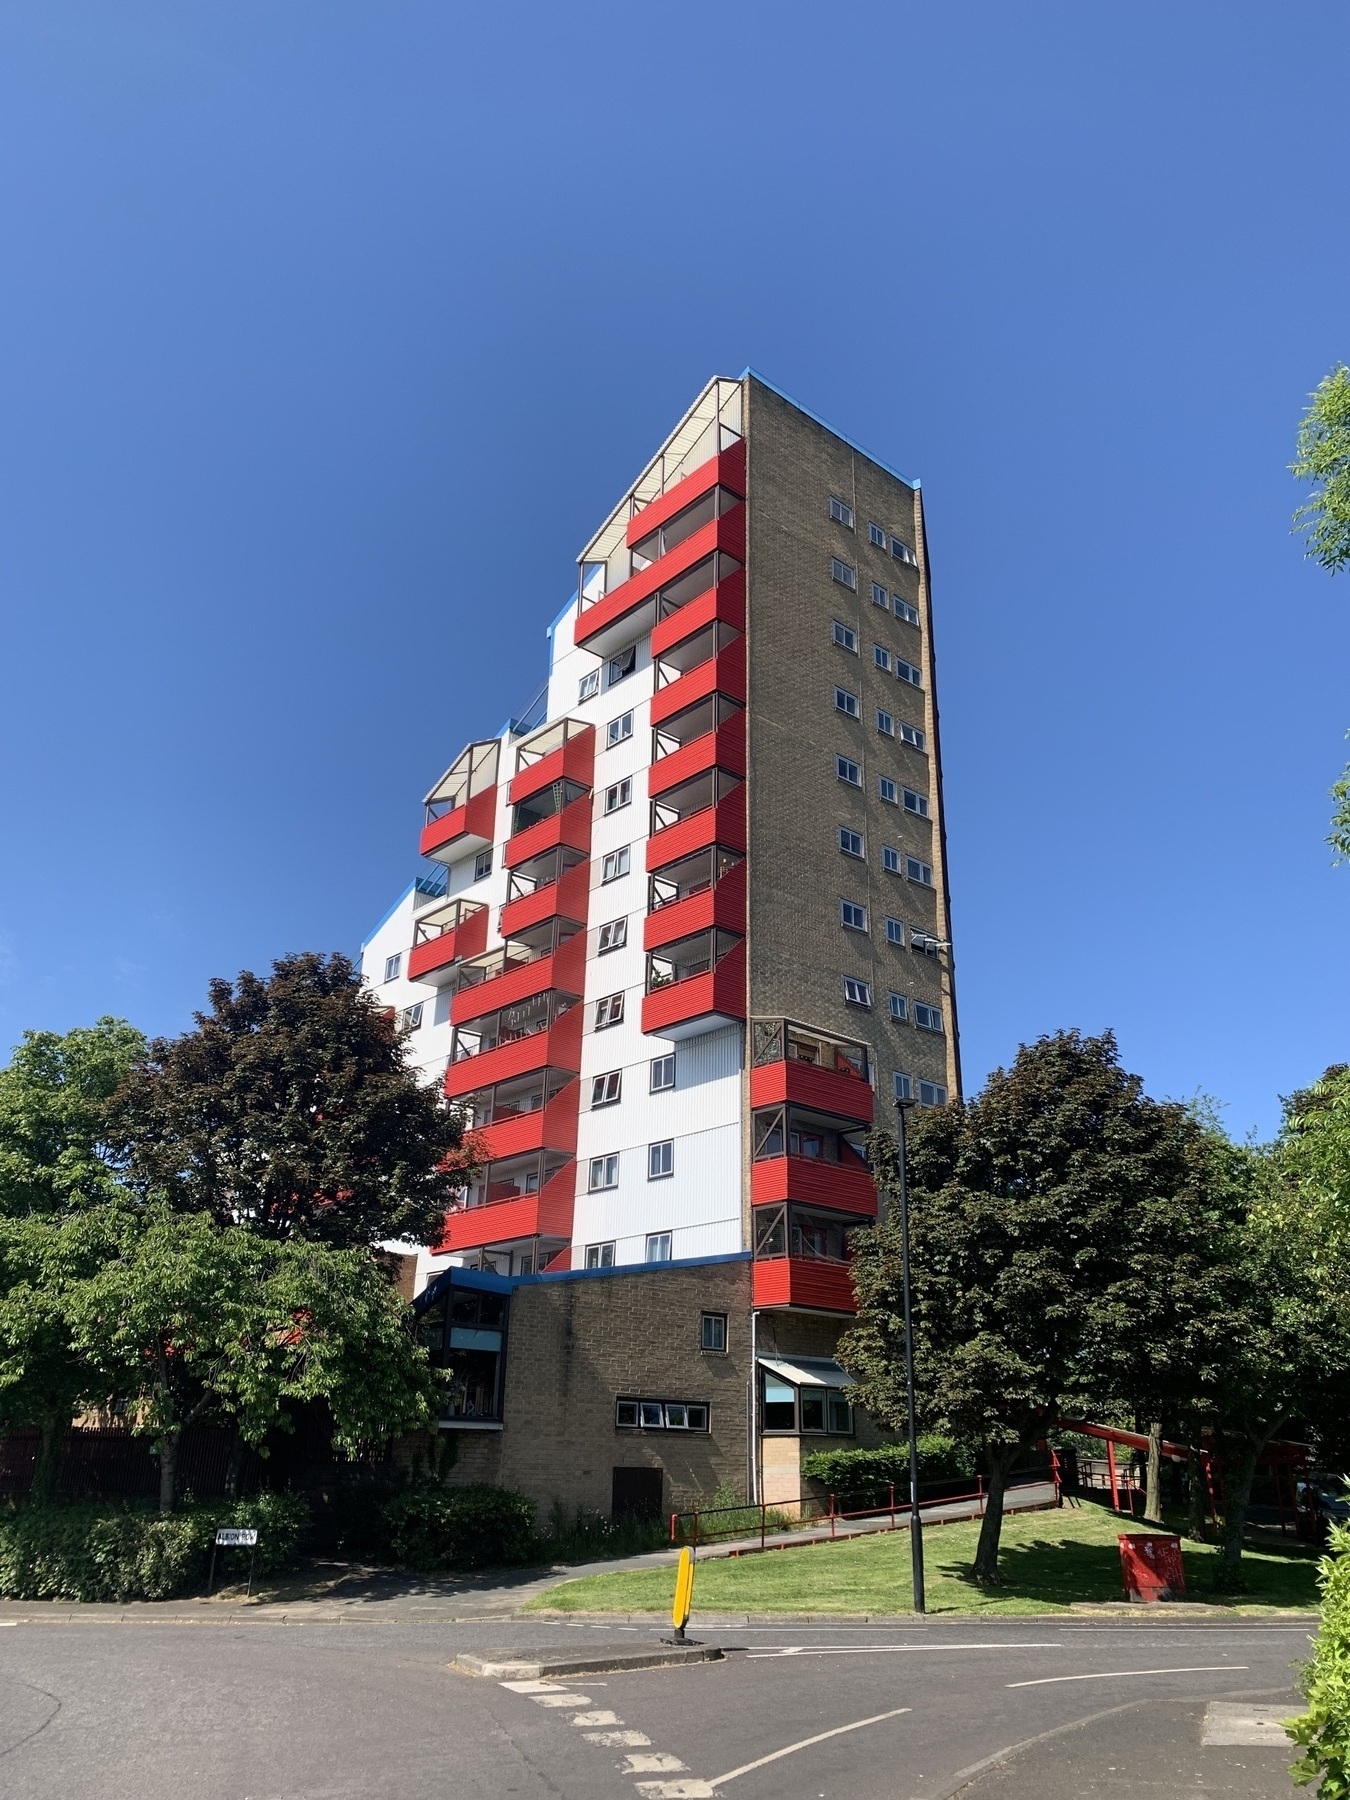 Tower block with white cladding and red balconies set against a bright blue sky